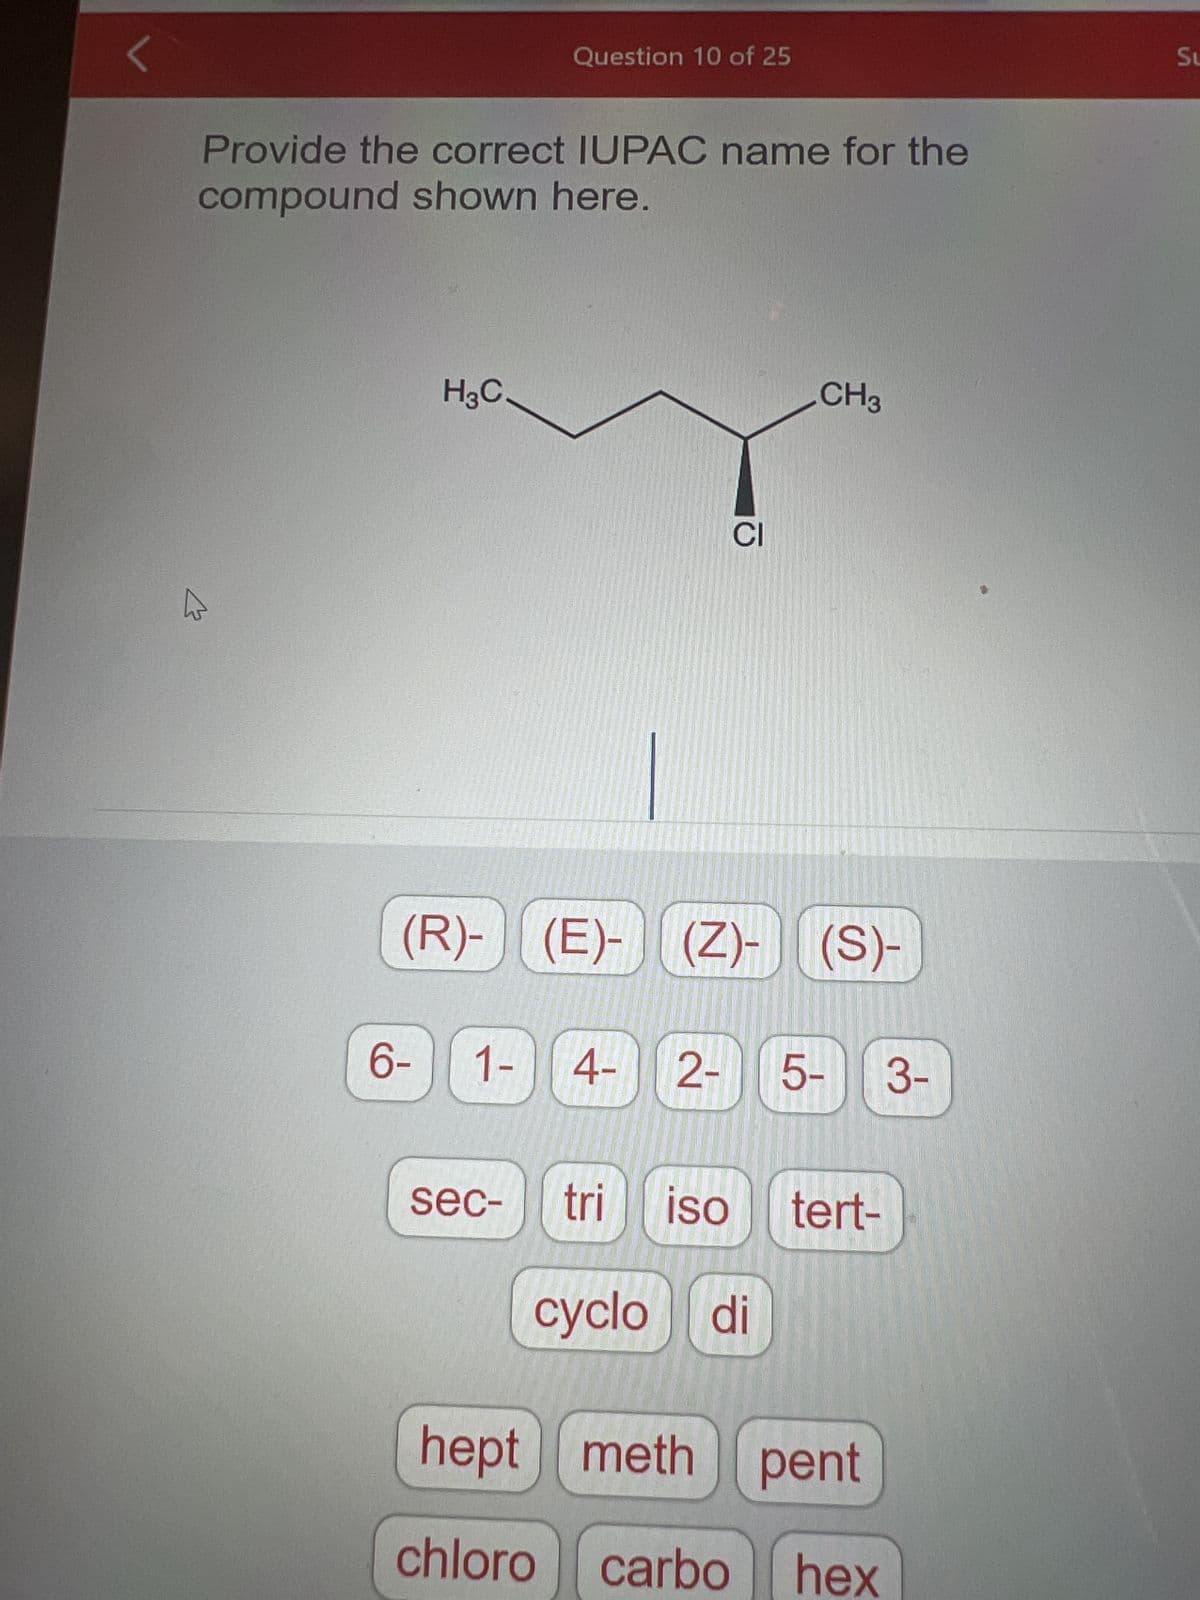 Provide the correct IUPAC name for the
compound shown here.
K
H3C.
6-
Question 10 of 25
CI
(R)- (E)- (Z)- (S)-
sec-
CH3
1- 4- 2- 5- 3-
tri ISO tert-
cyclo di
hept meth pent
chloro carbo hex
Su